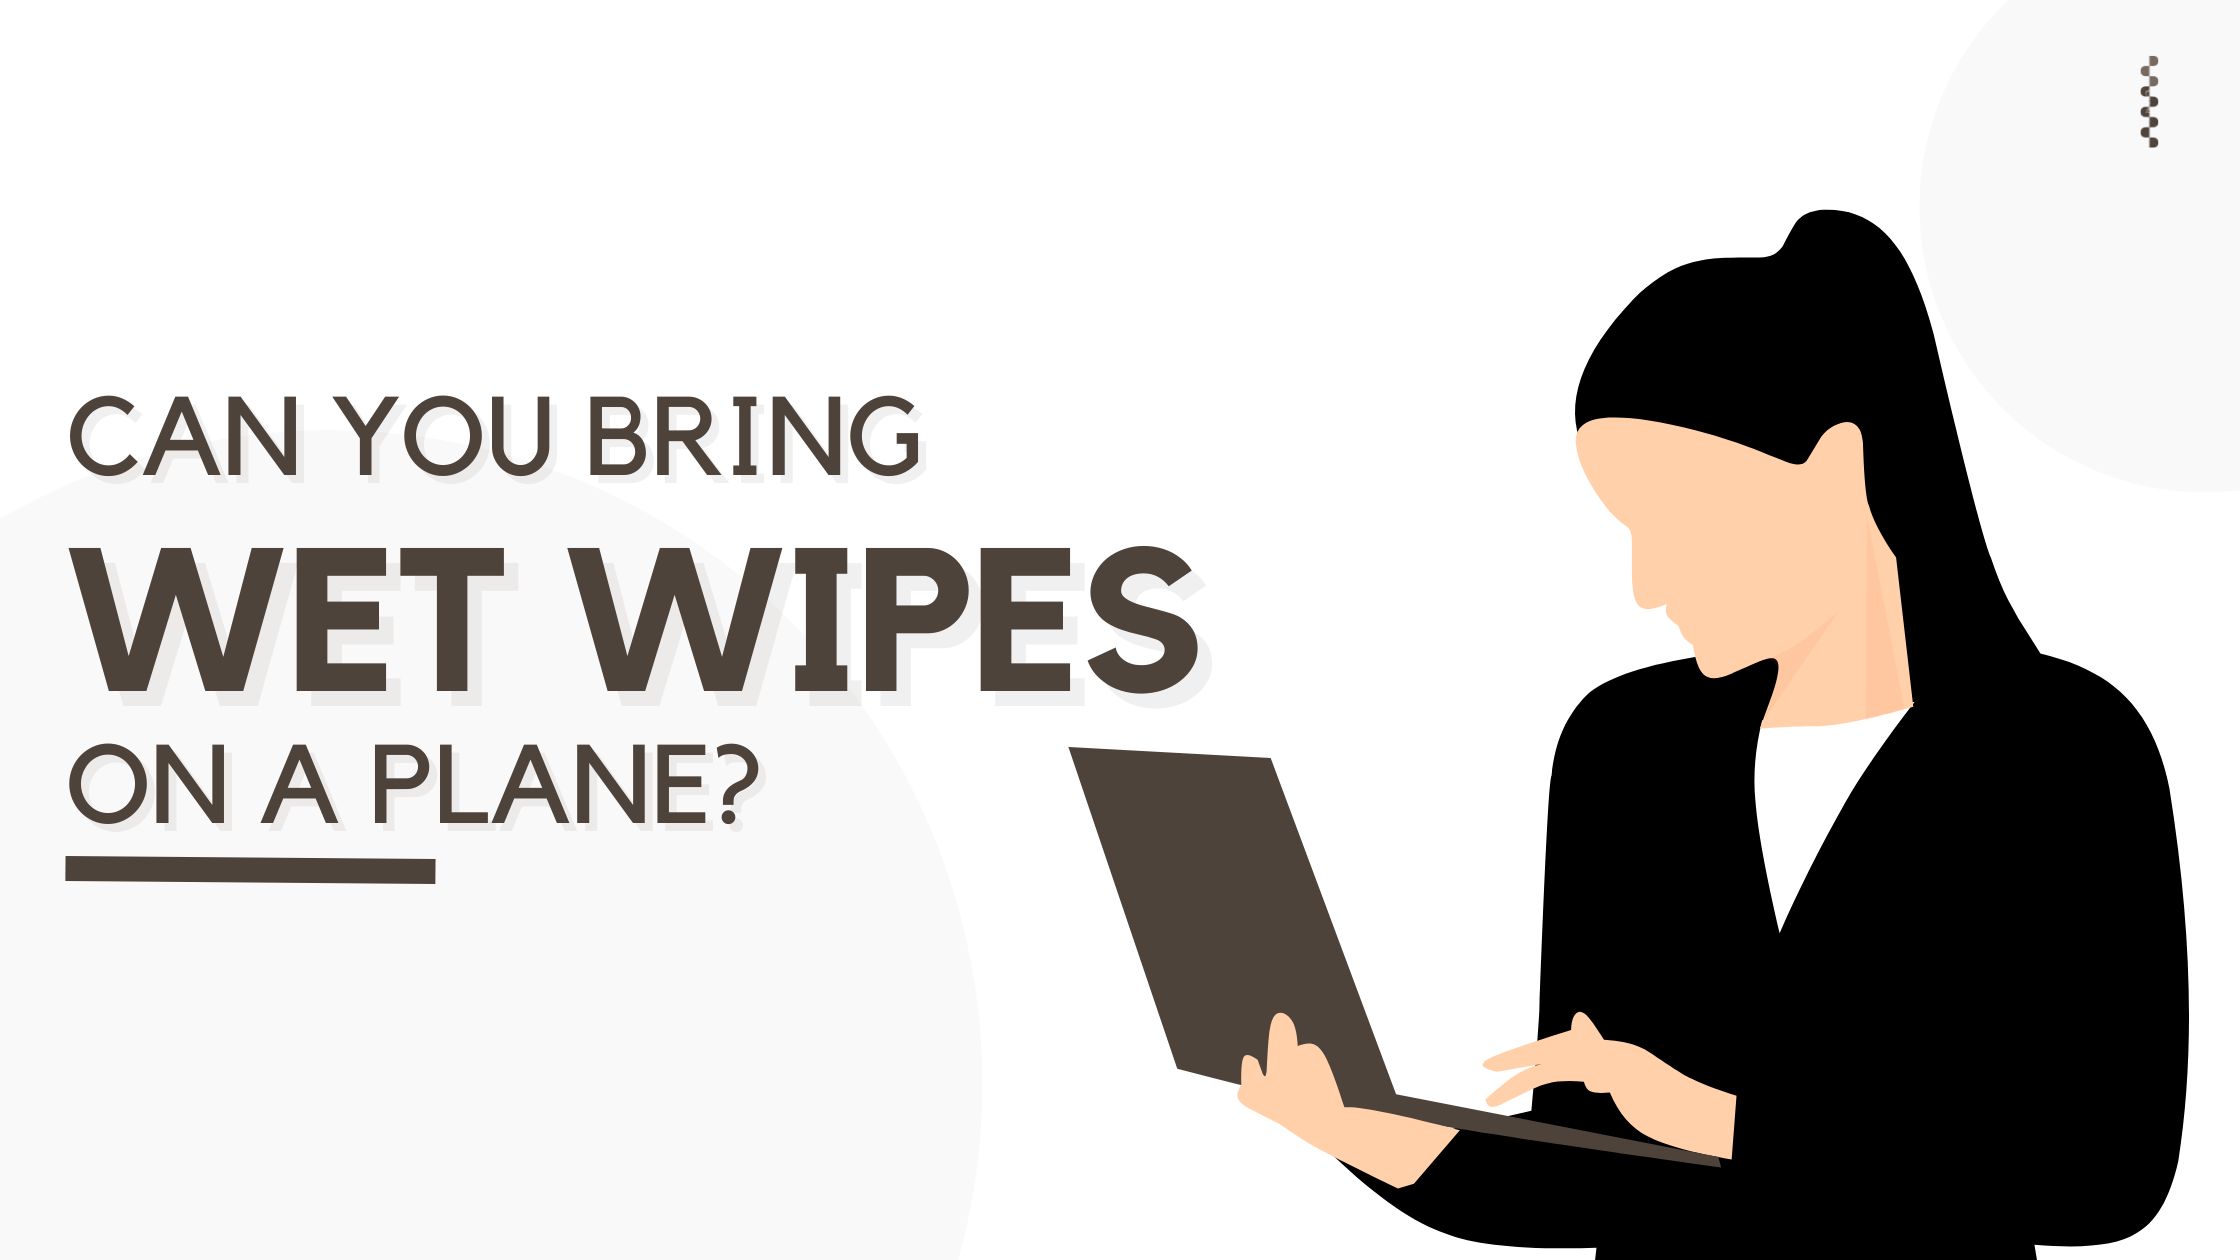 Can You Bring Wet Wipes On A Plane?